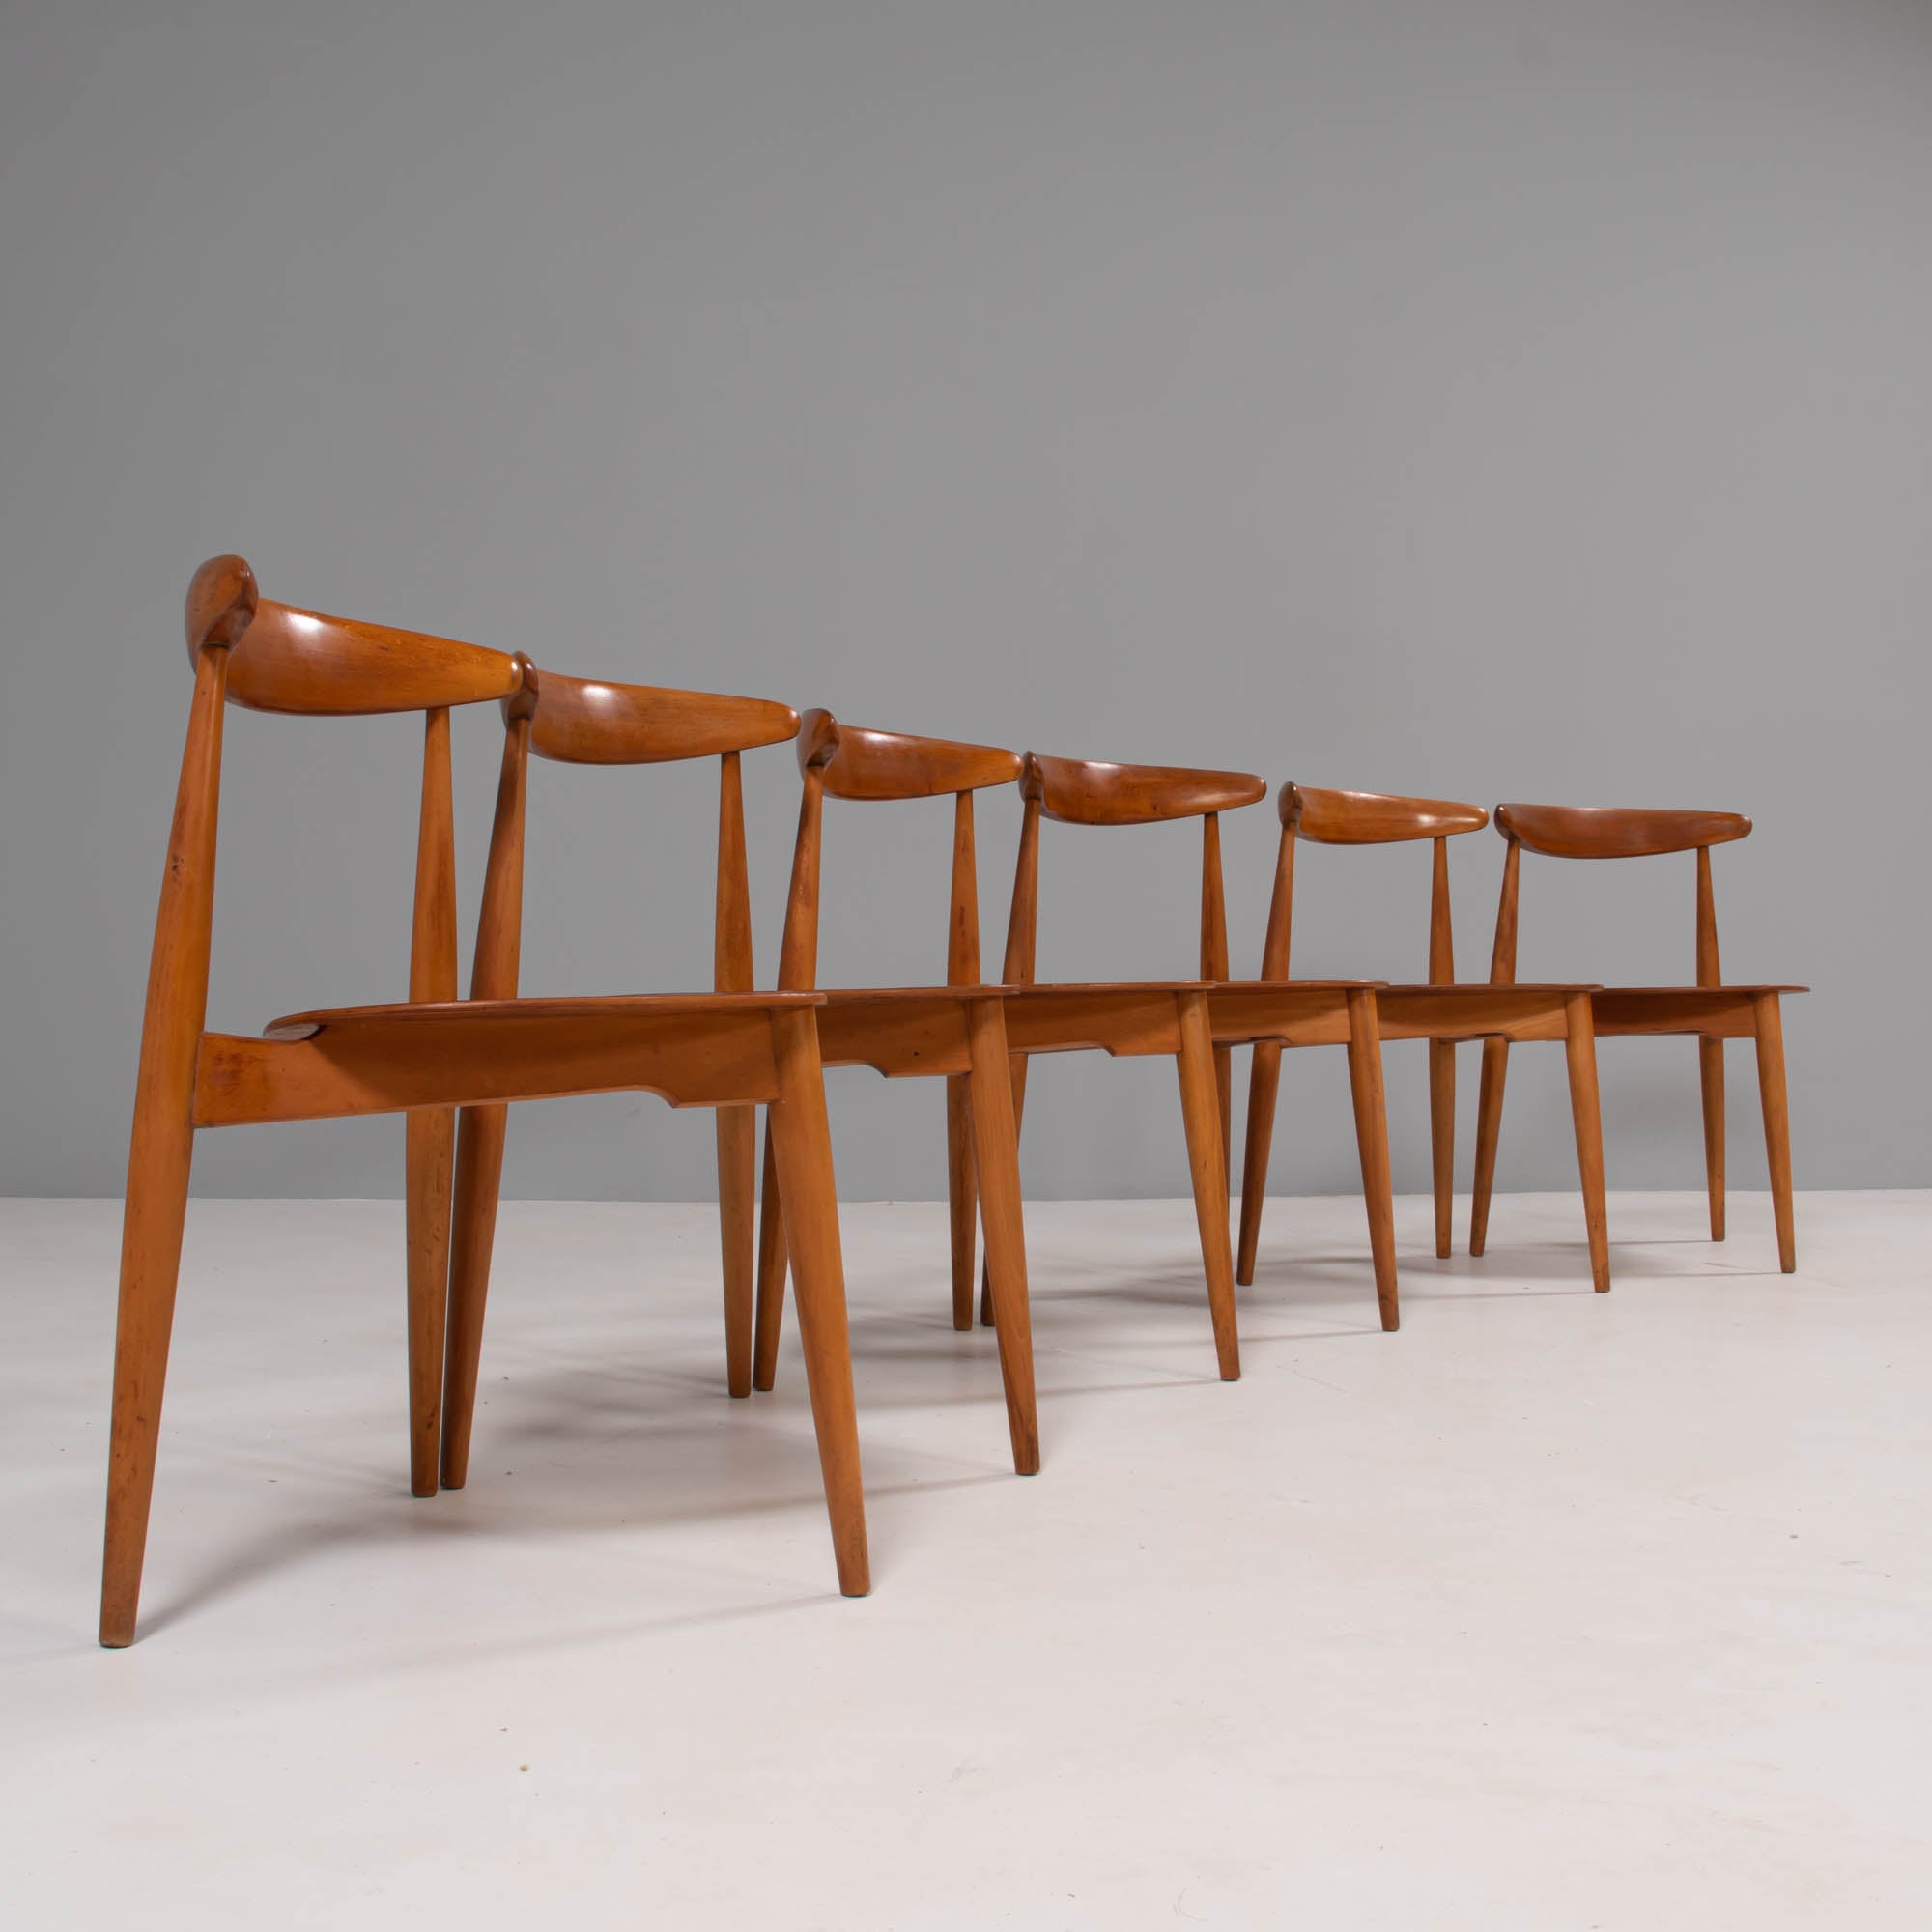 A nice set of dining chairs is more uplifting than any January fad diet